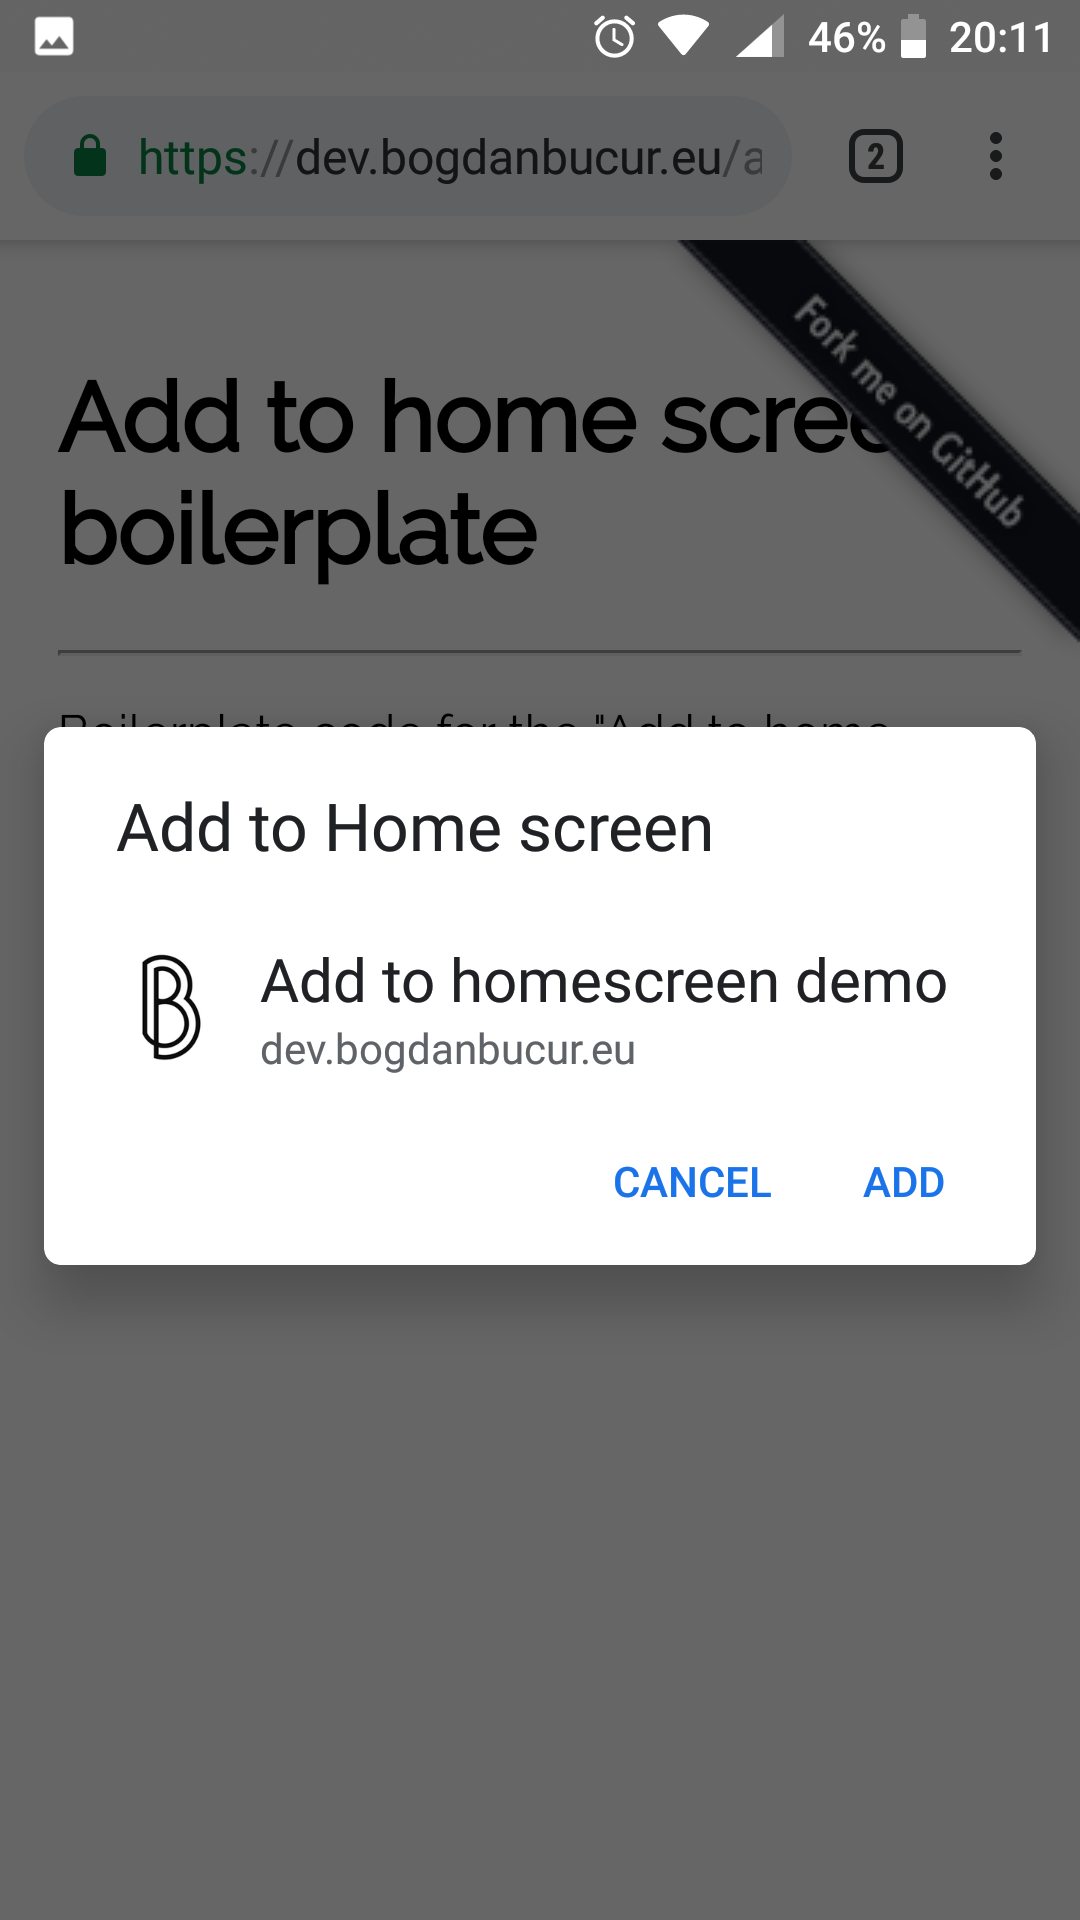 Add to home screen prompt